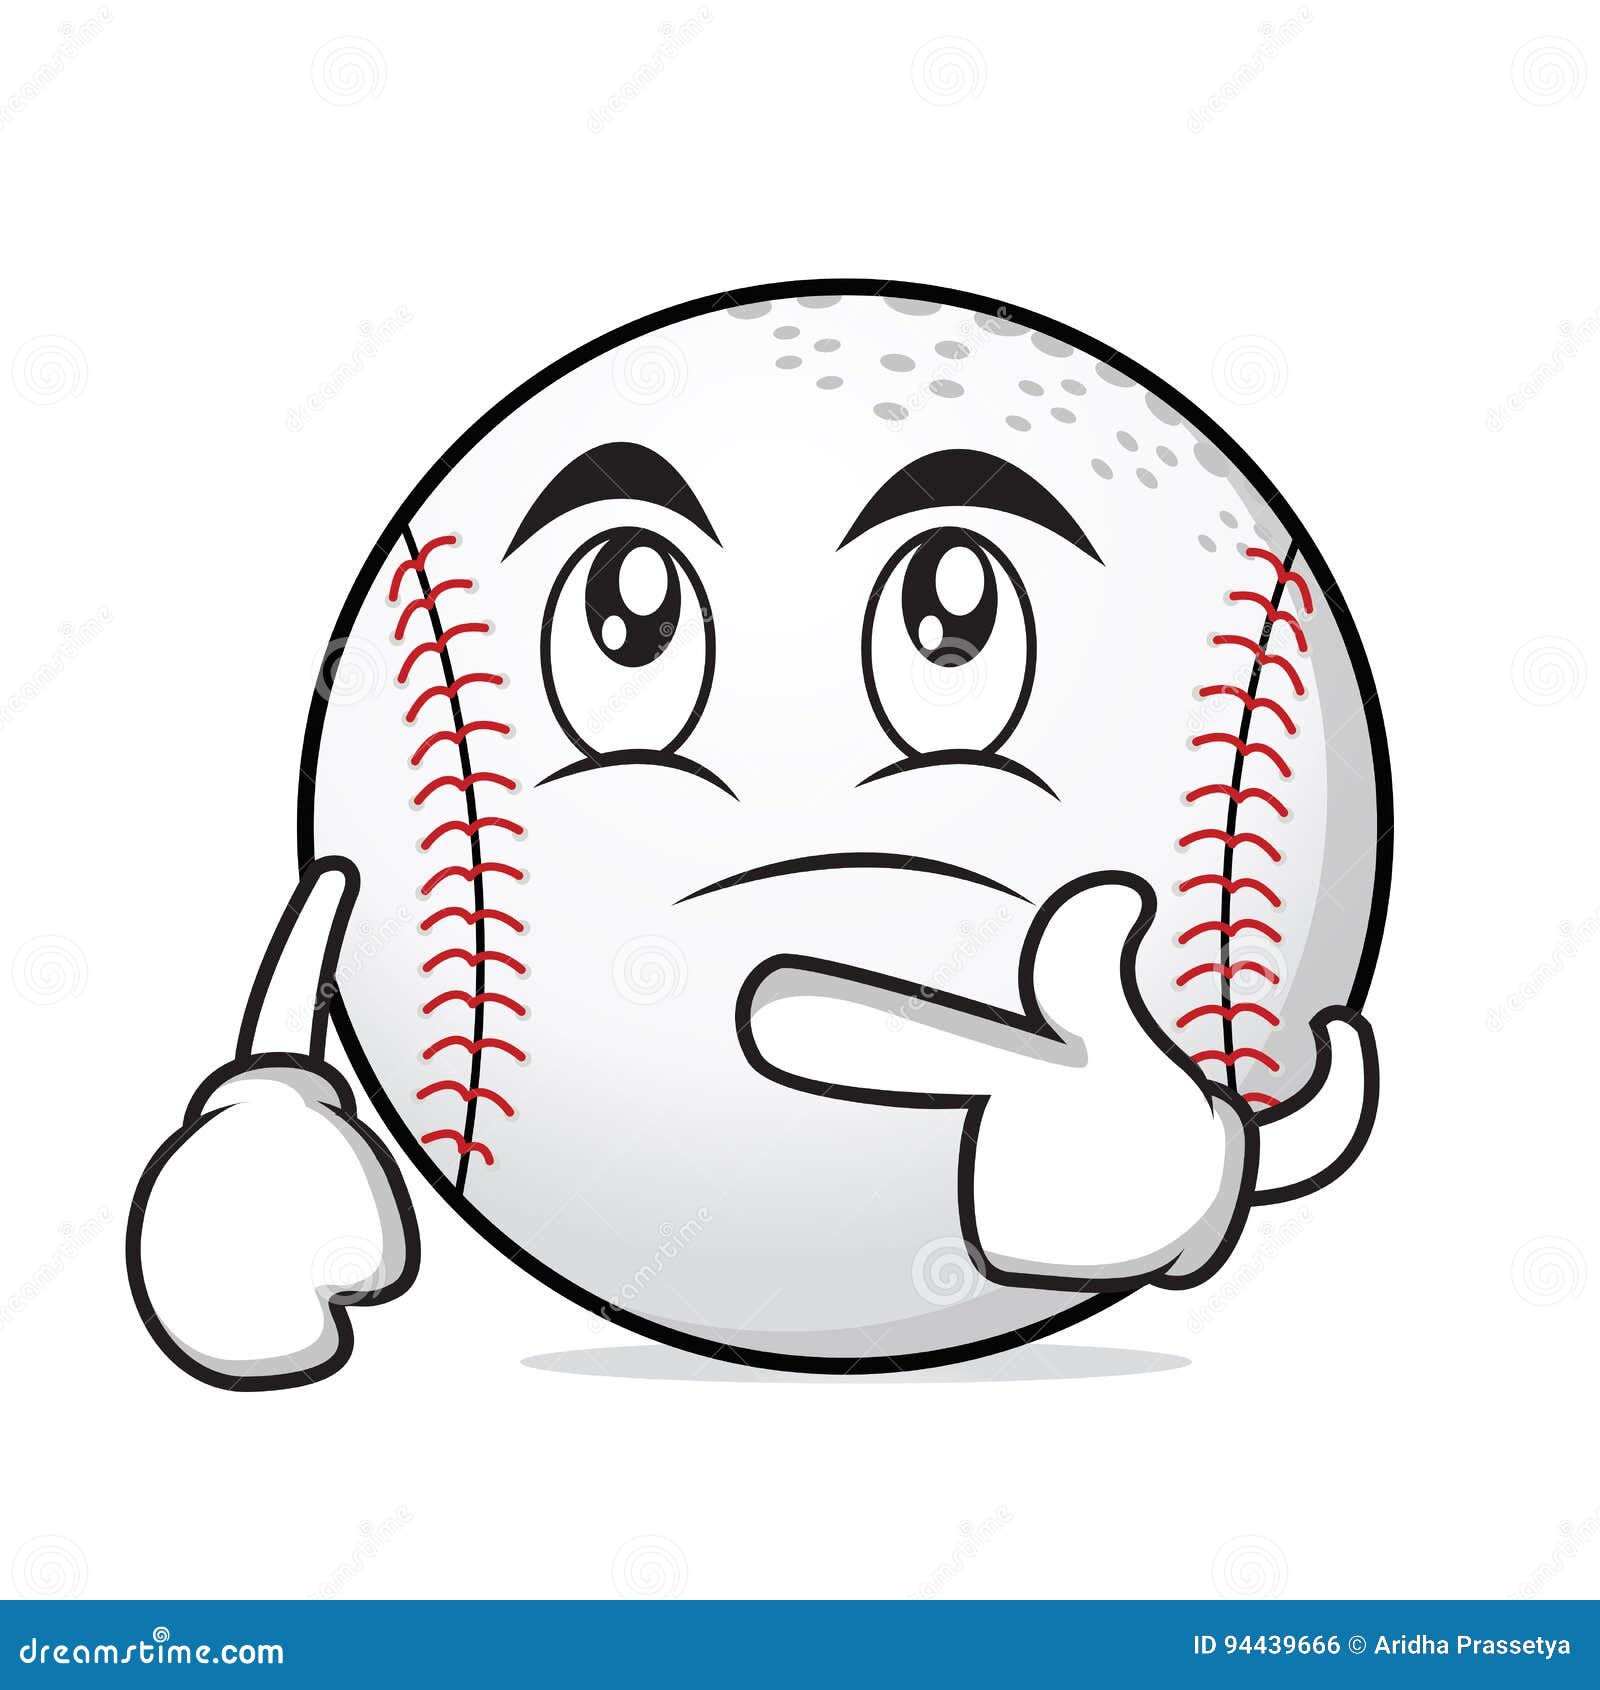 Thinking Face Baseball Cartoon Character Stock Vector - Illustration of  collection, cute: 94439666